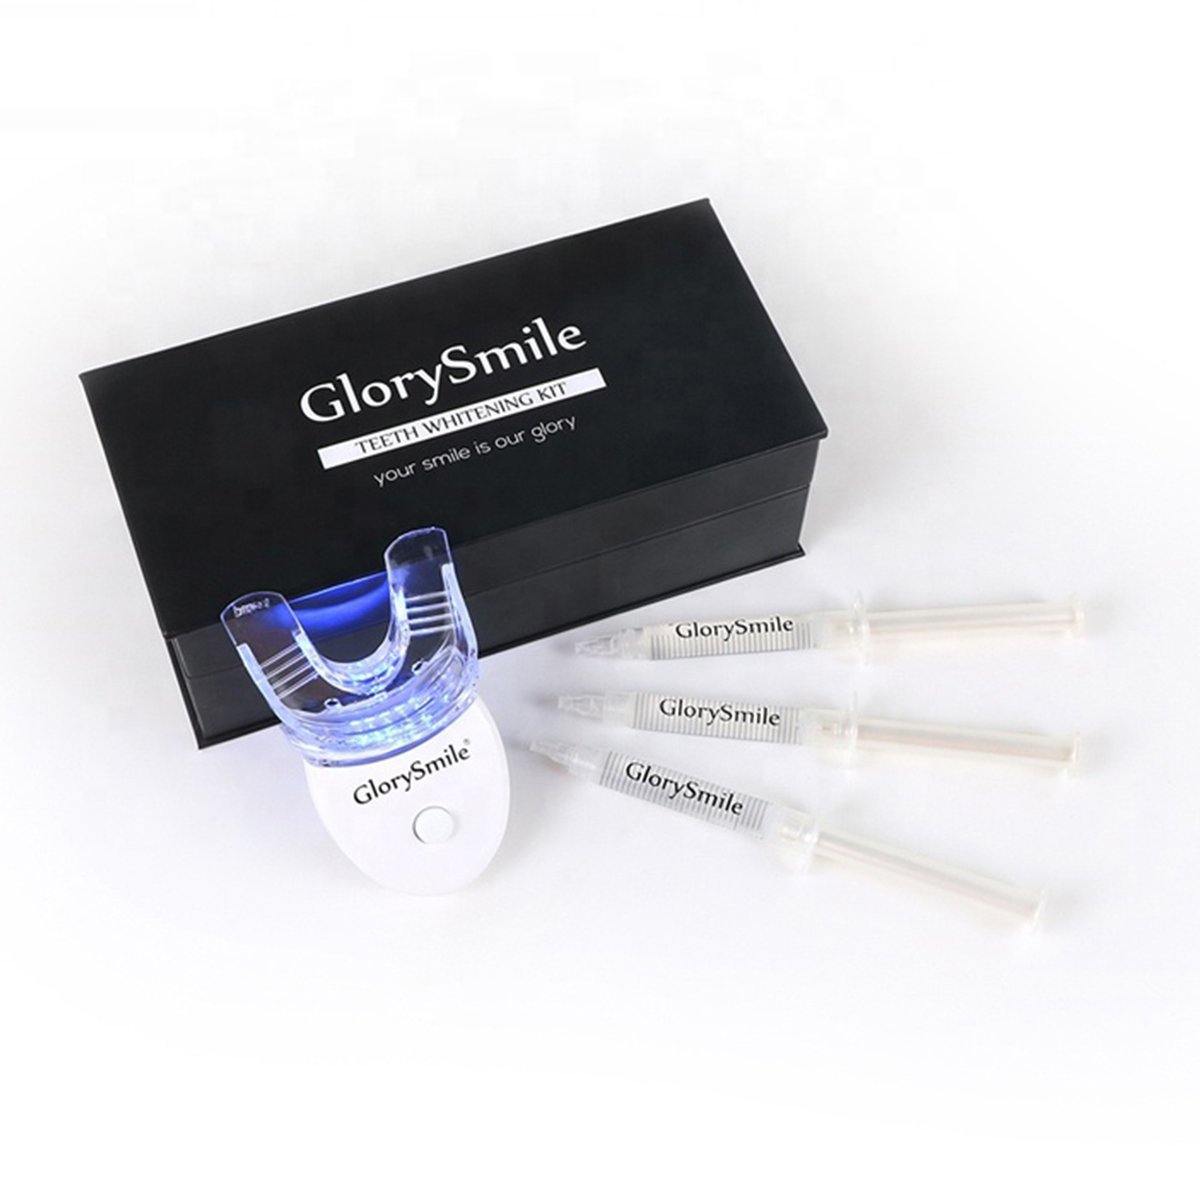 The Ultimate Teeth Whitening Kit - Oraly